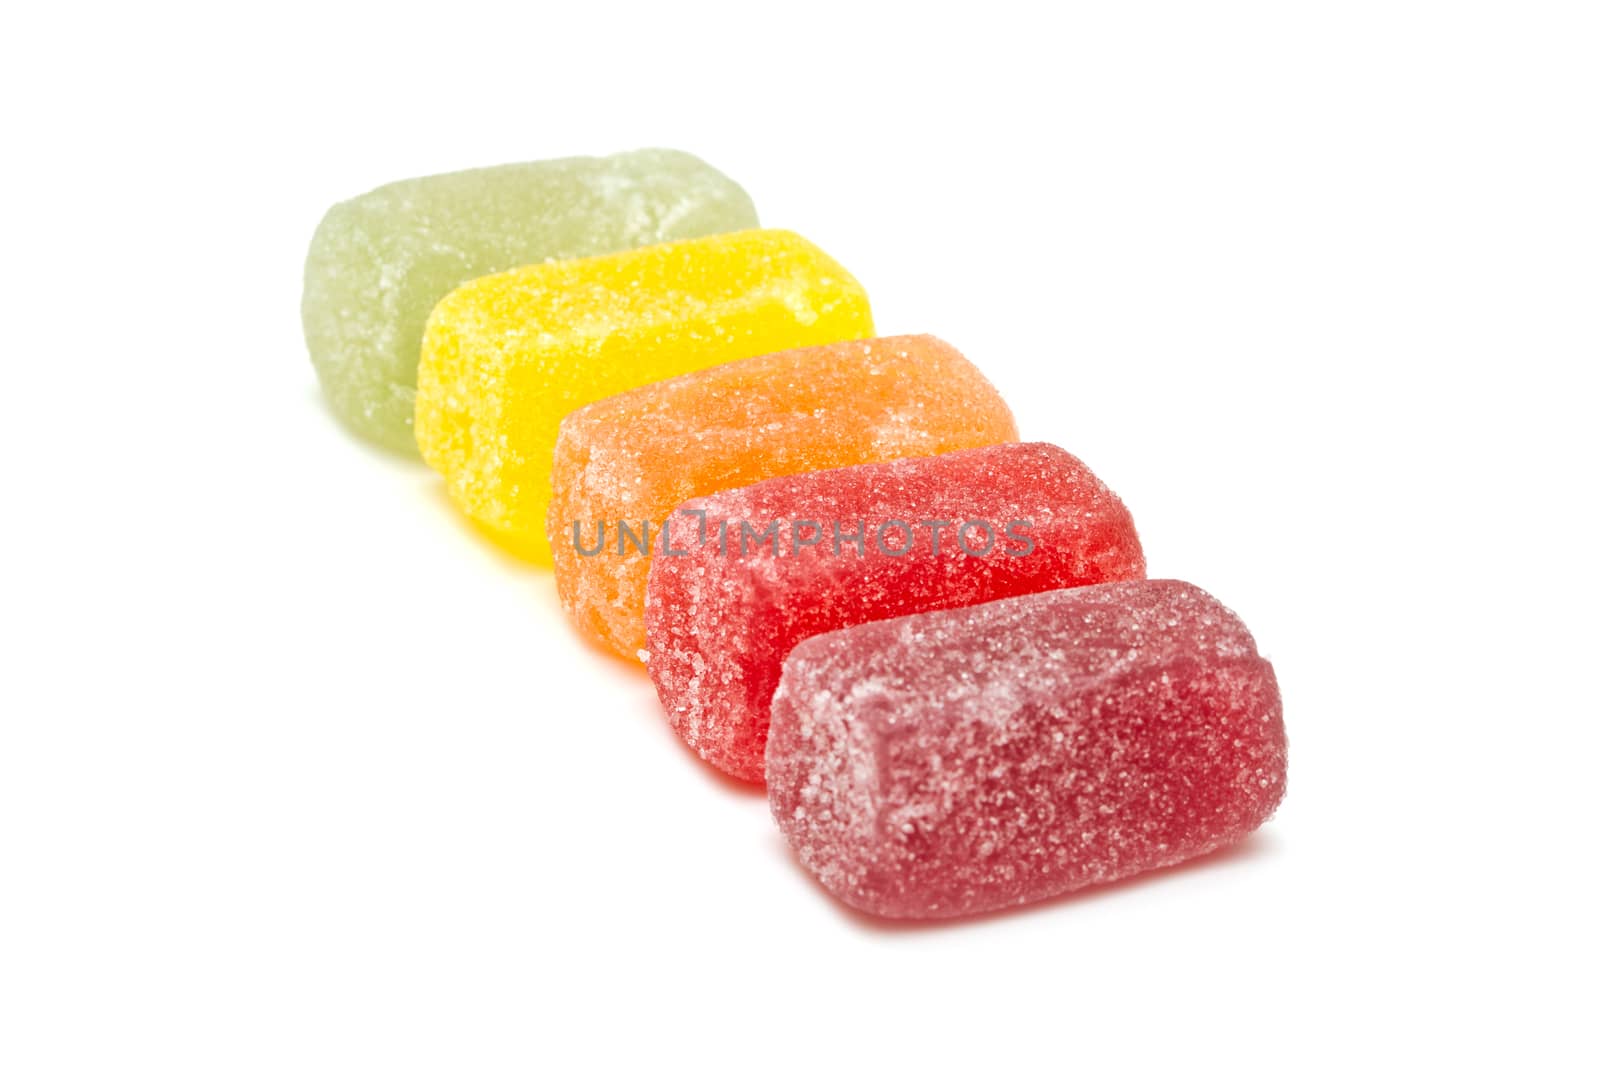 Different fruit jellies on white background